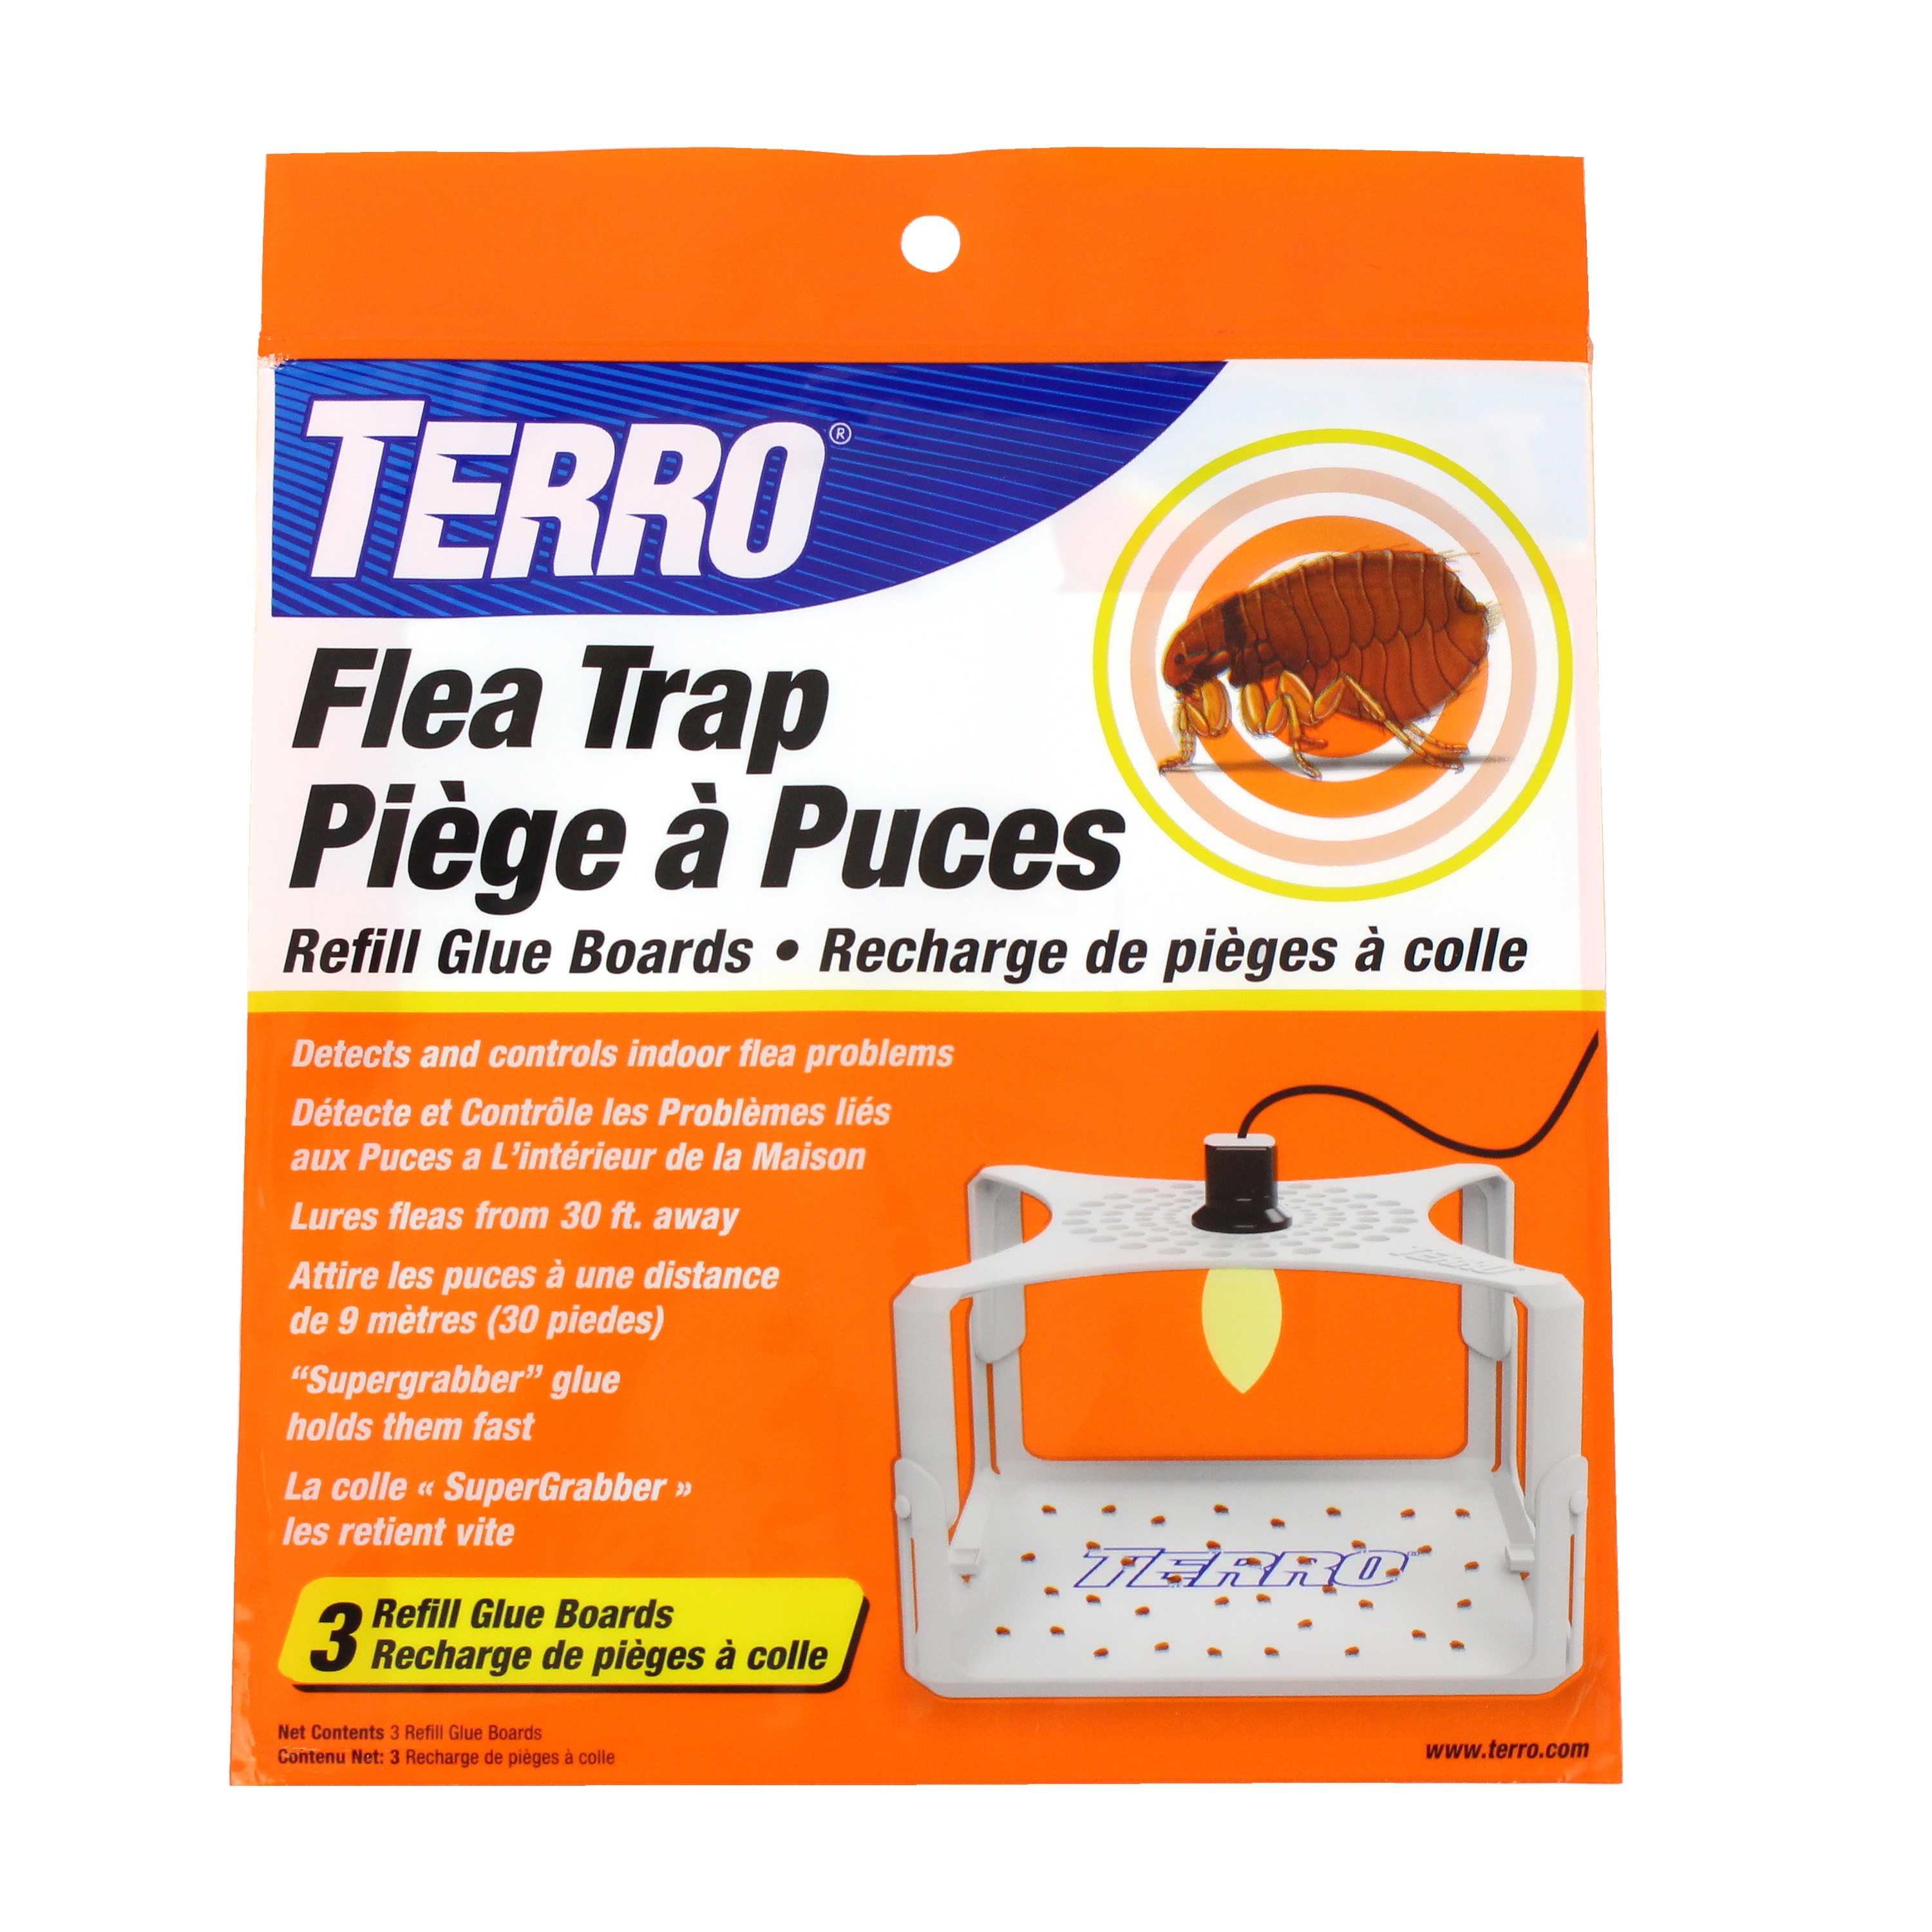 Flying Insect Trap Refill Kit, Indoor Plug-in Fly Trap Refill Sticky Glue  Cards, Safe Non